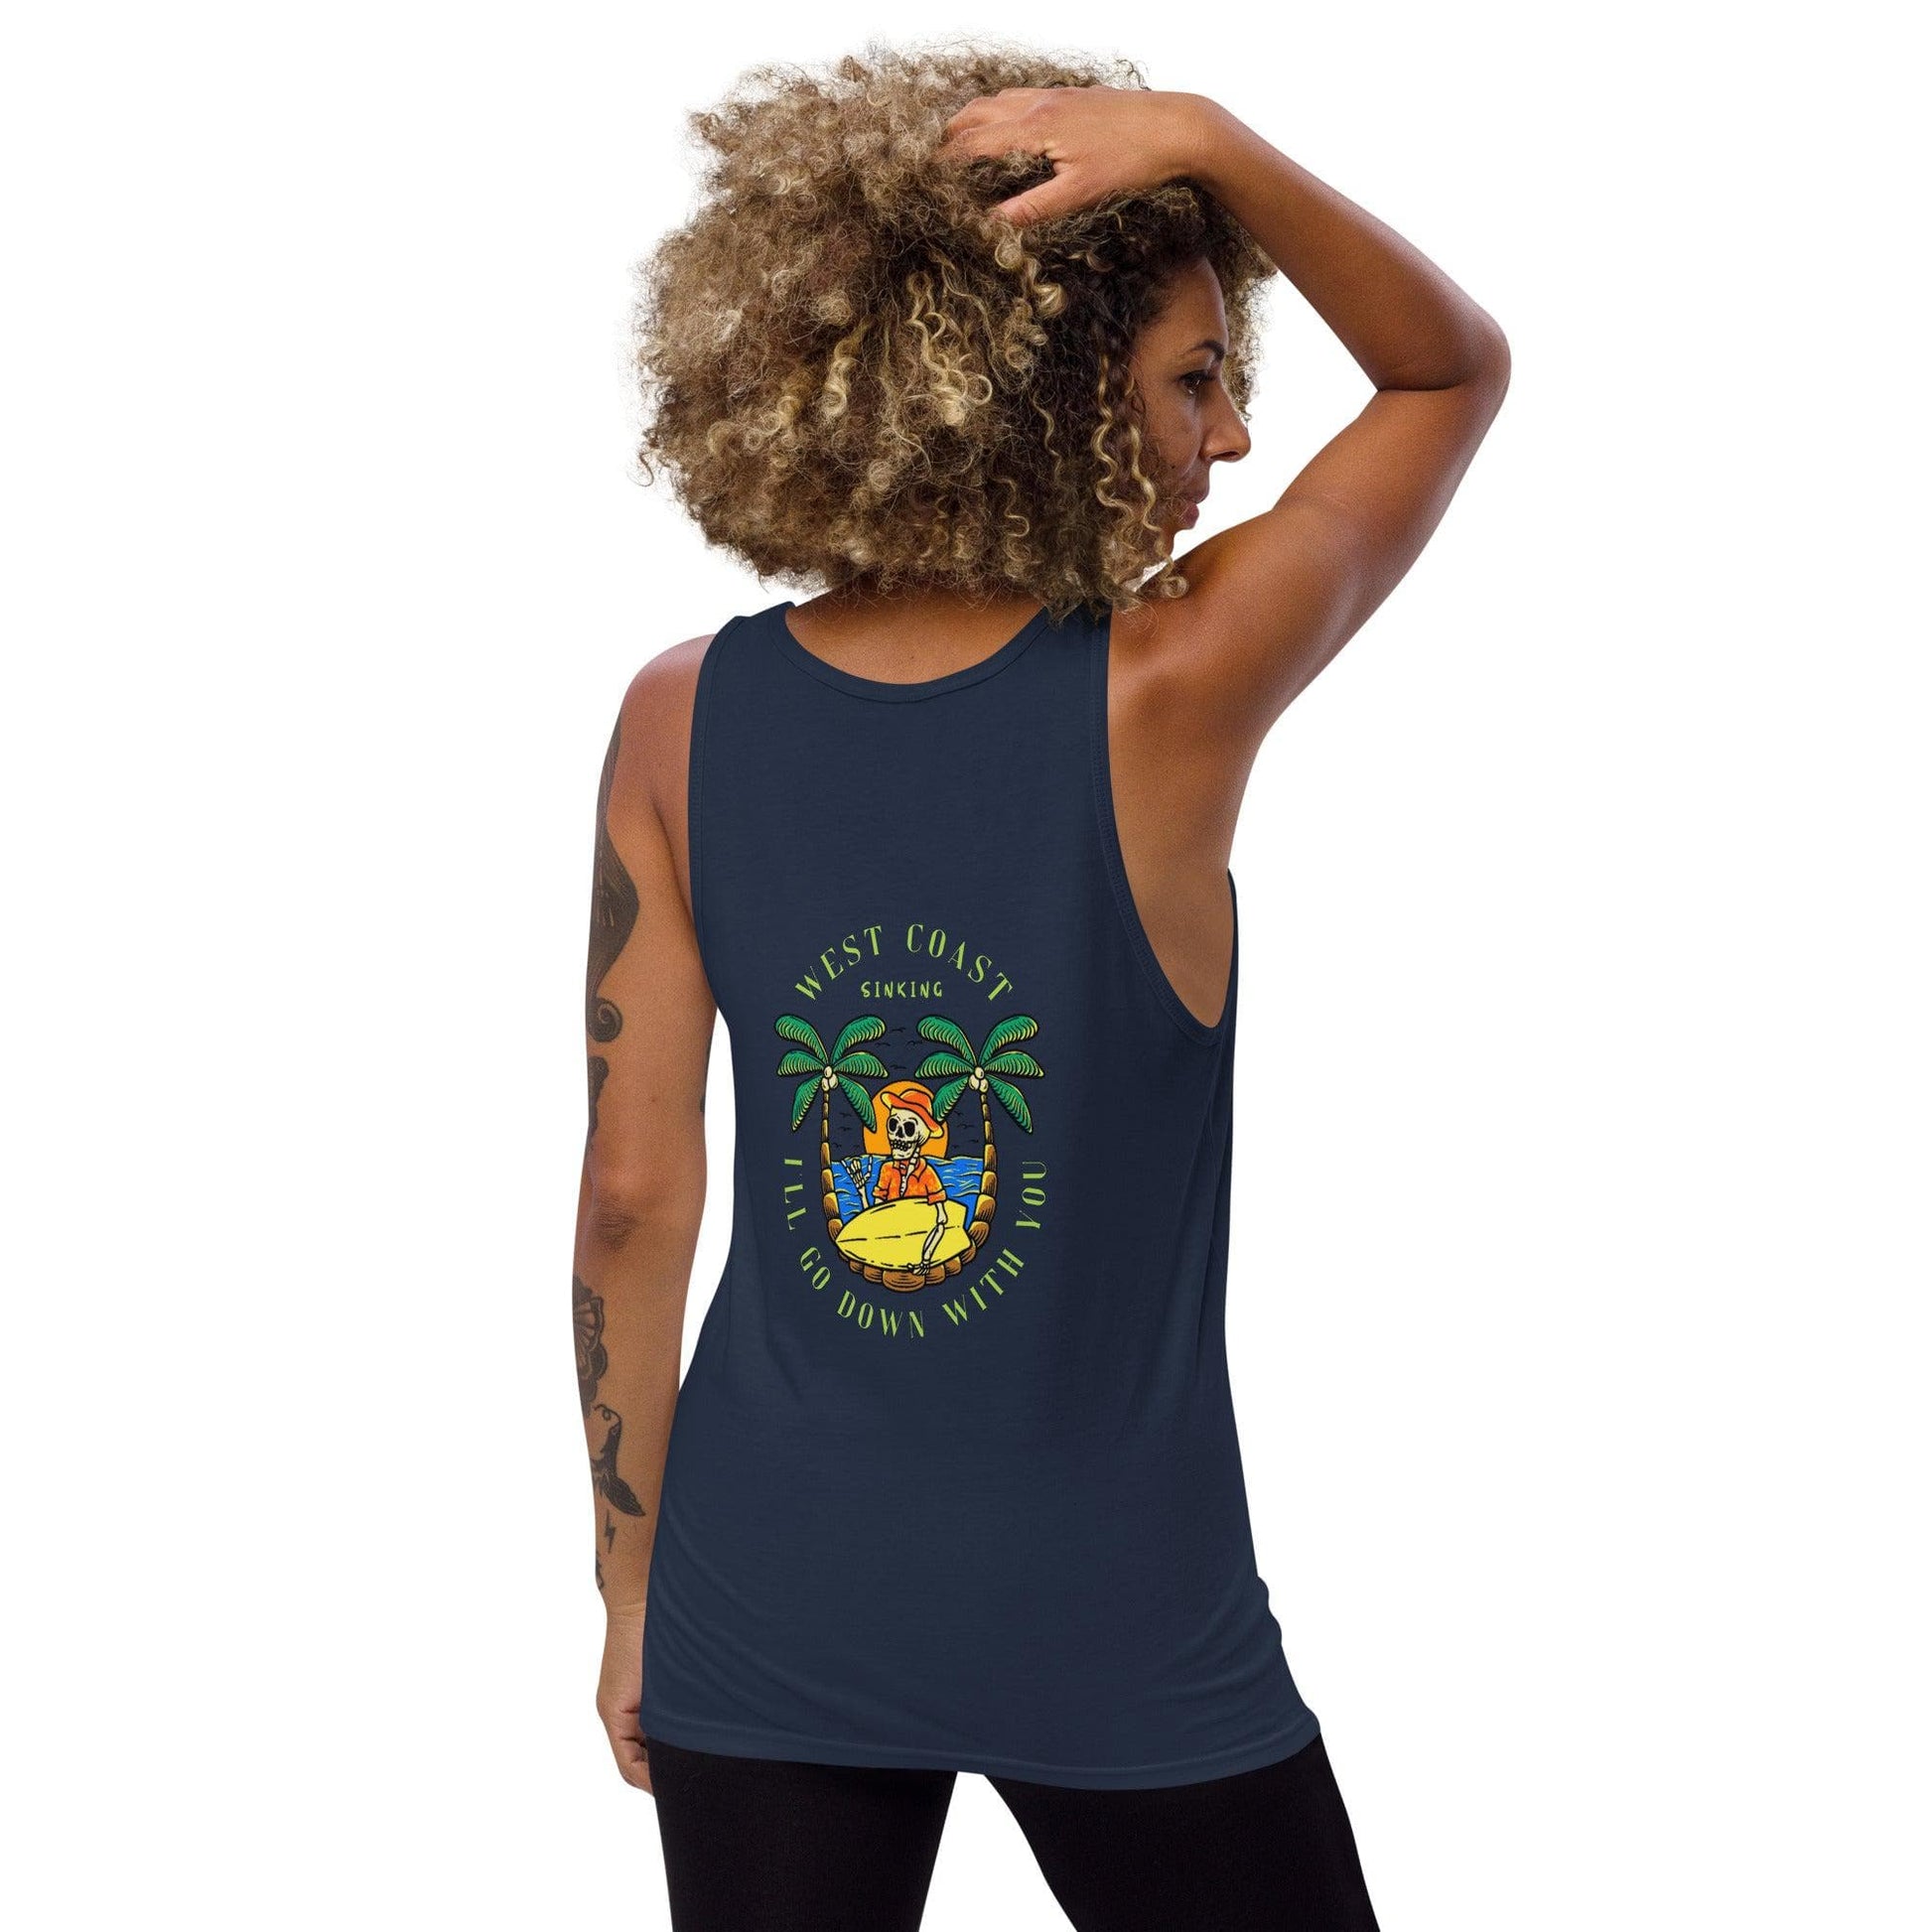 Local Summer Collective Navy / XS West Coast Sinking Unisex Tank Top